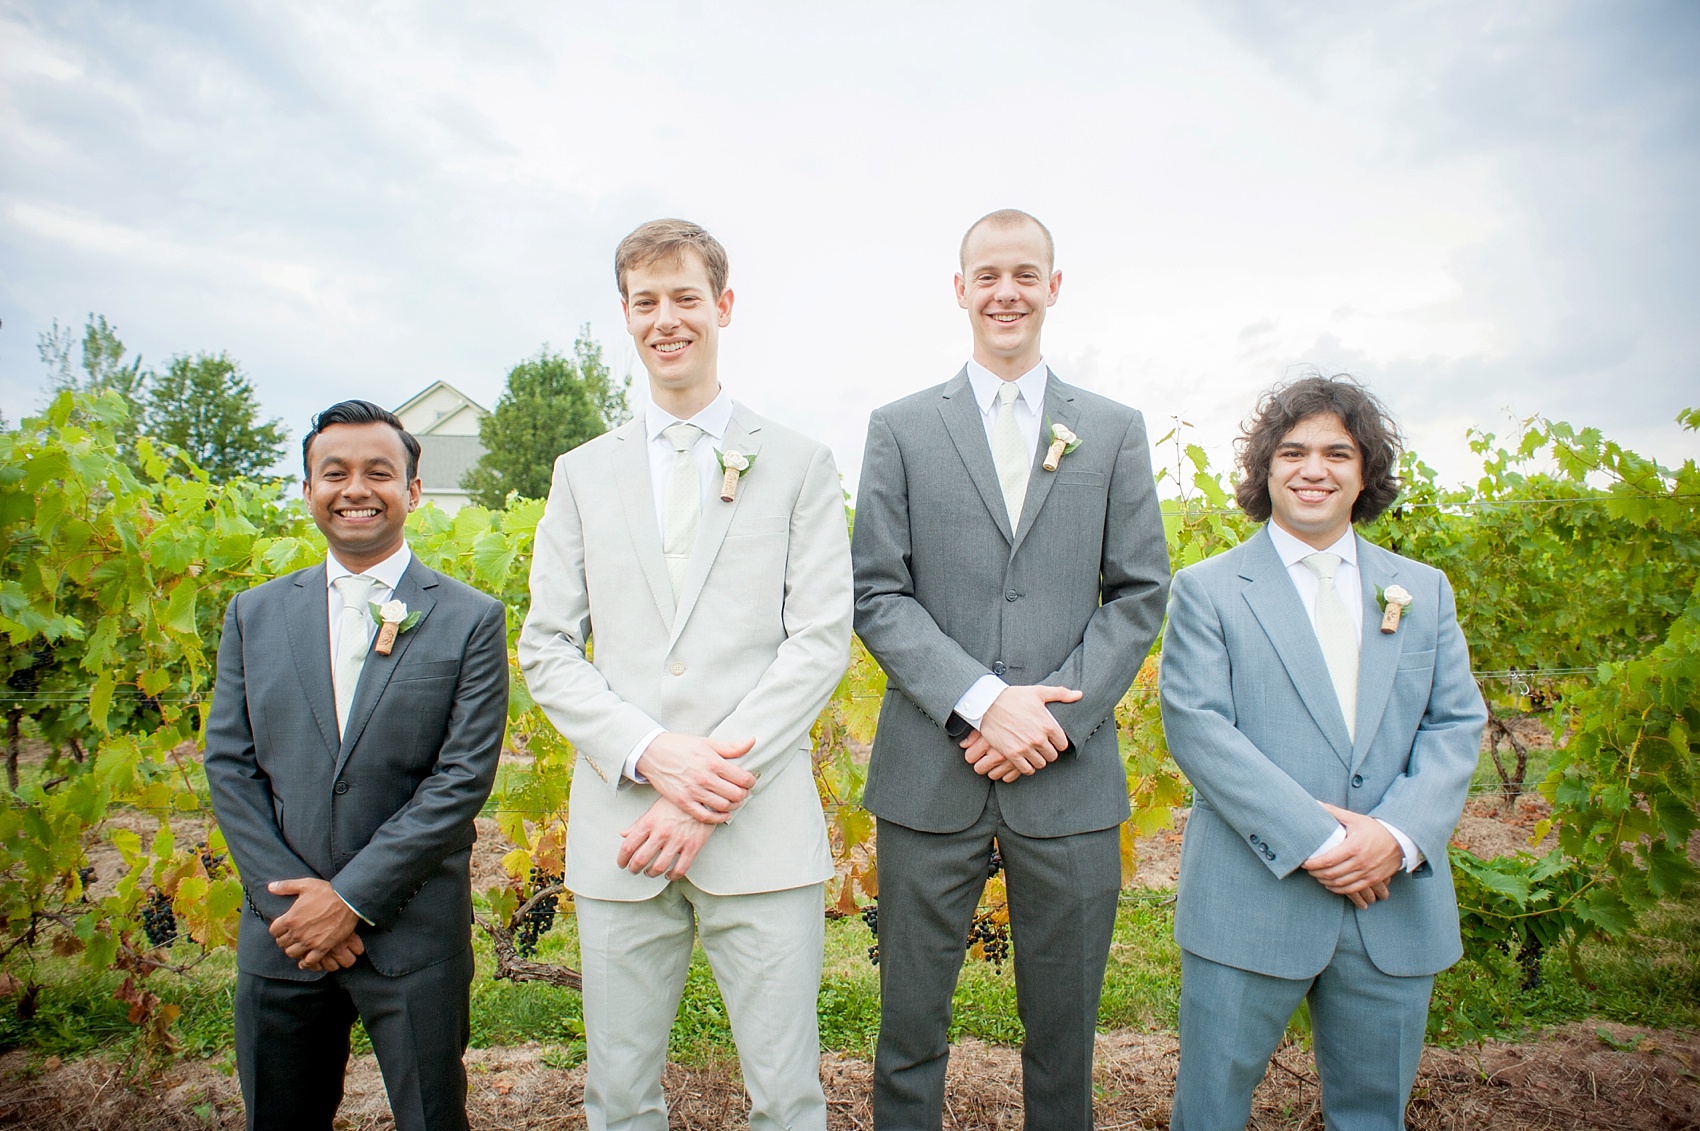 Groom in J. Crew with his groomsmen for a summer vineyard wedding at Hopewell Valley Vineyards. Photos by New Jersey wedding photographer, Mikkel Paige Photography.